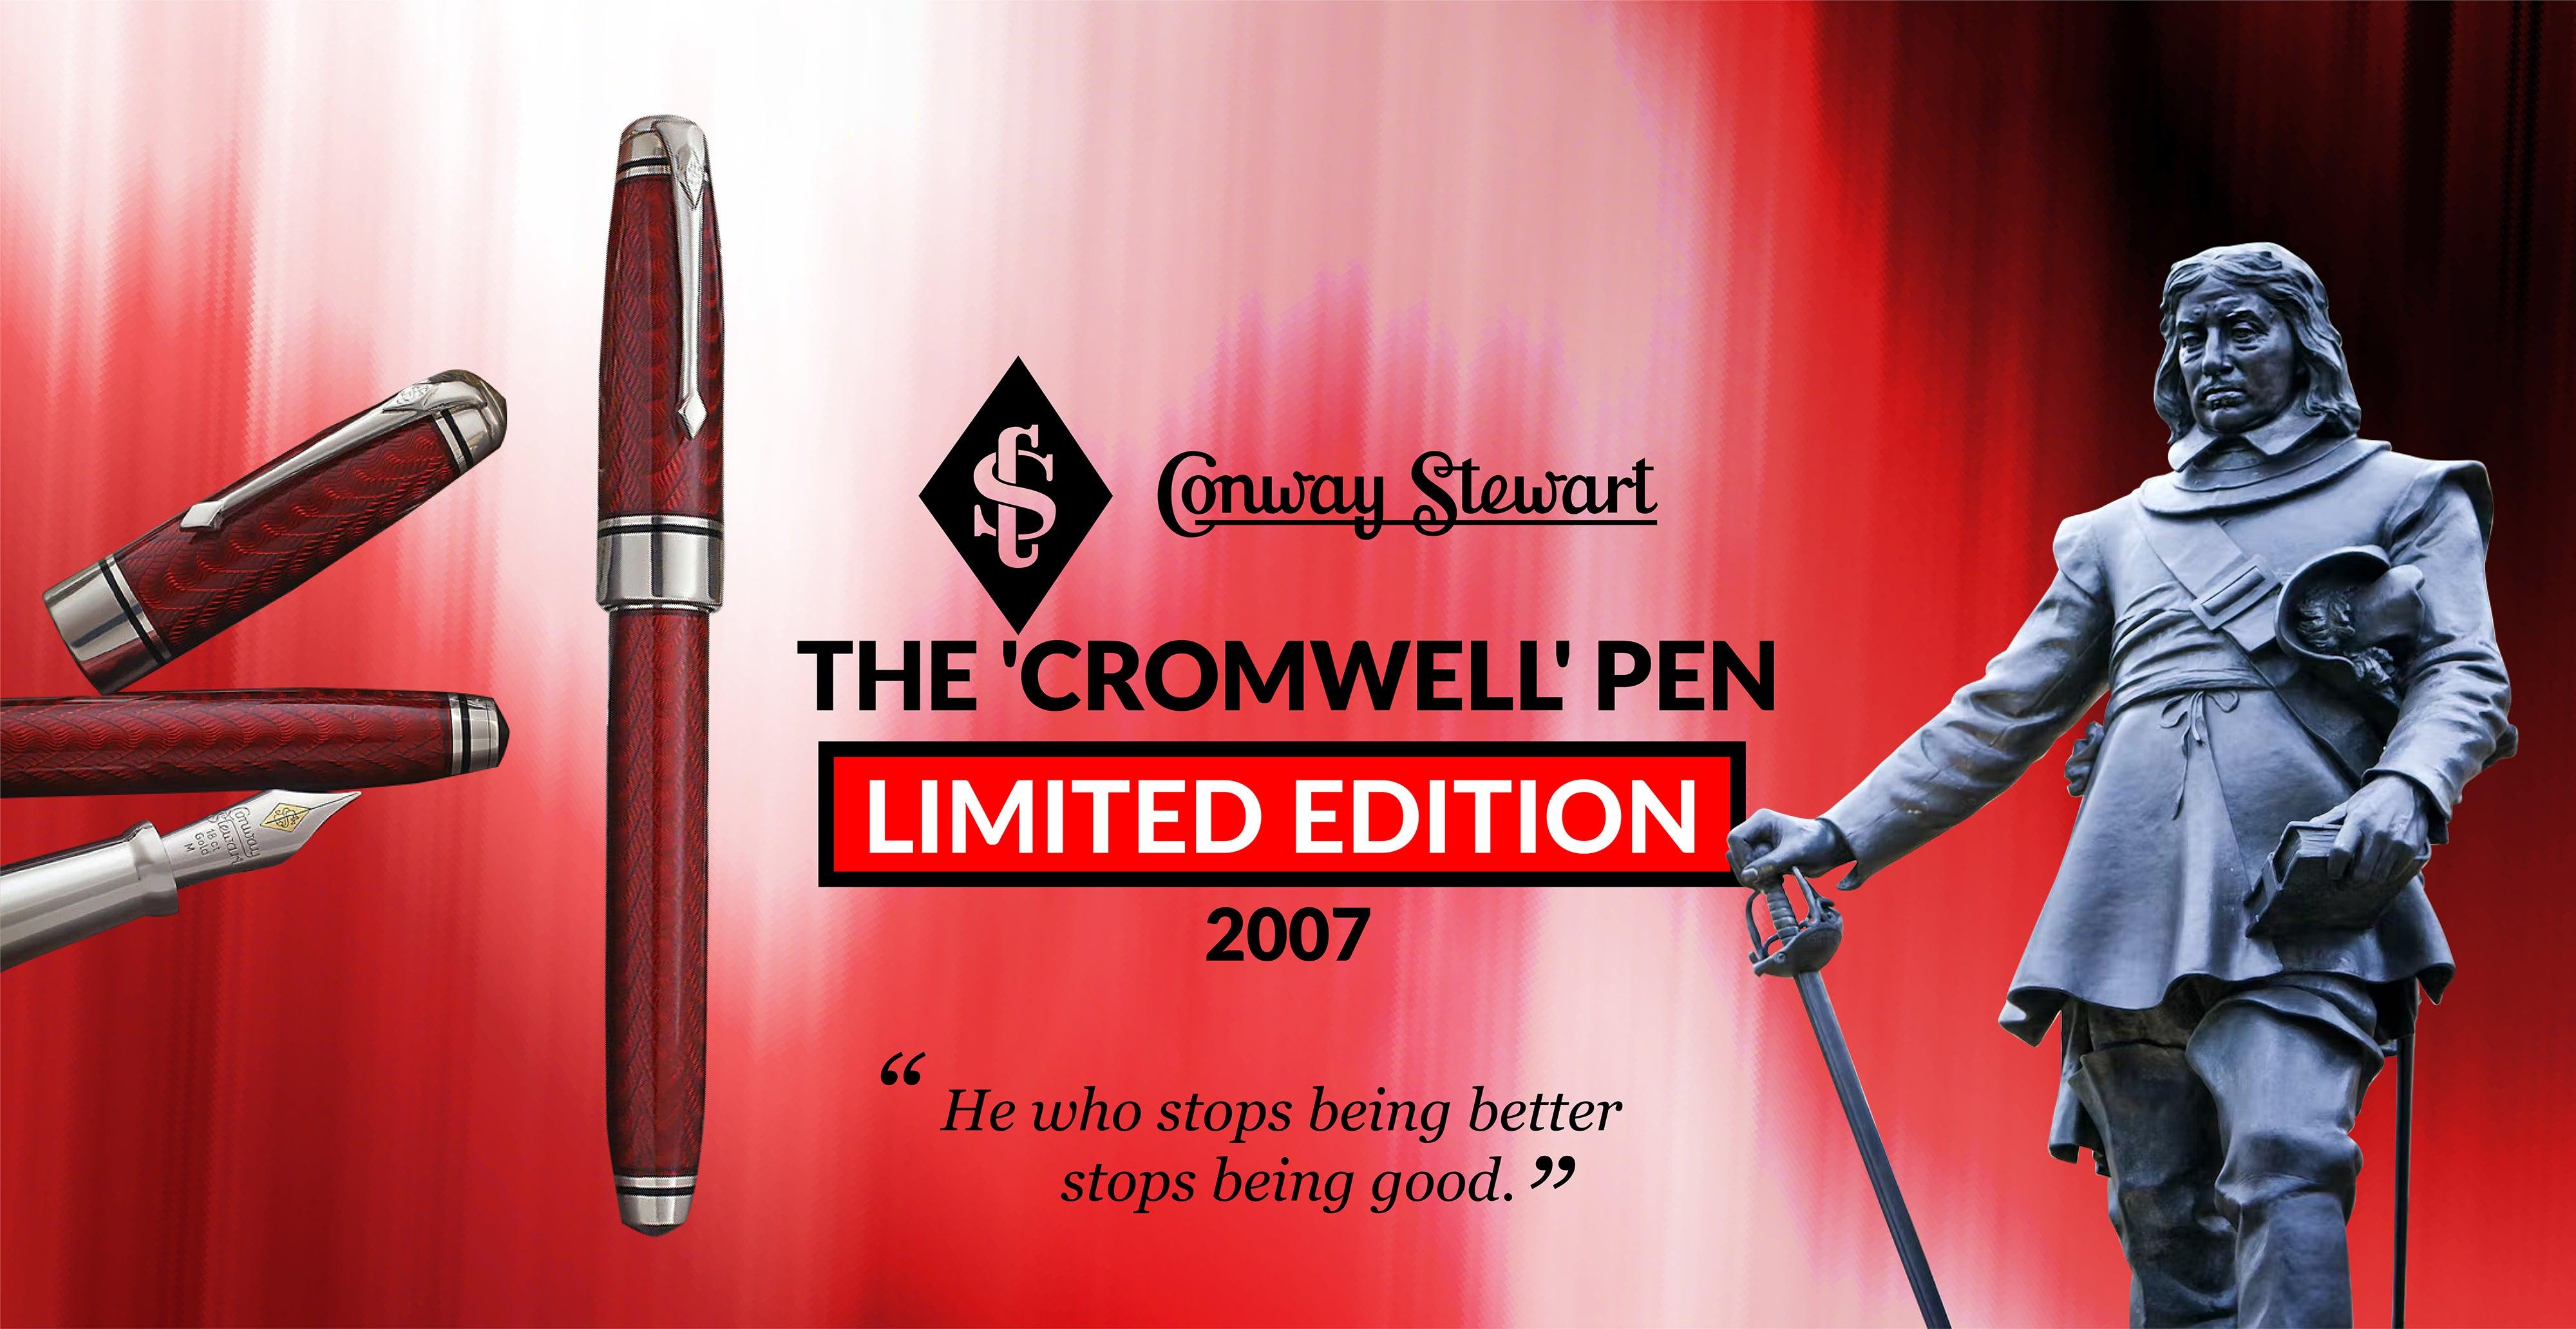 The 'Cromwell' Pen, 2007 conwaystewart.com